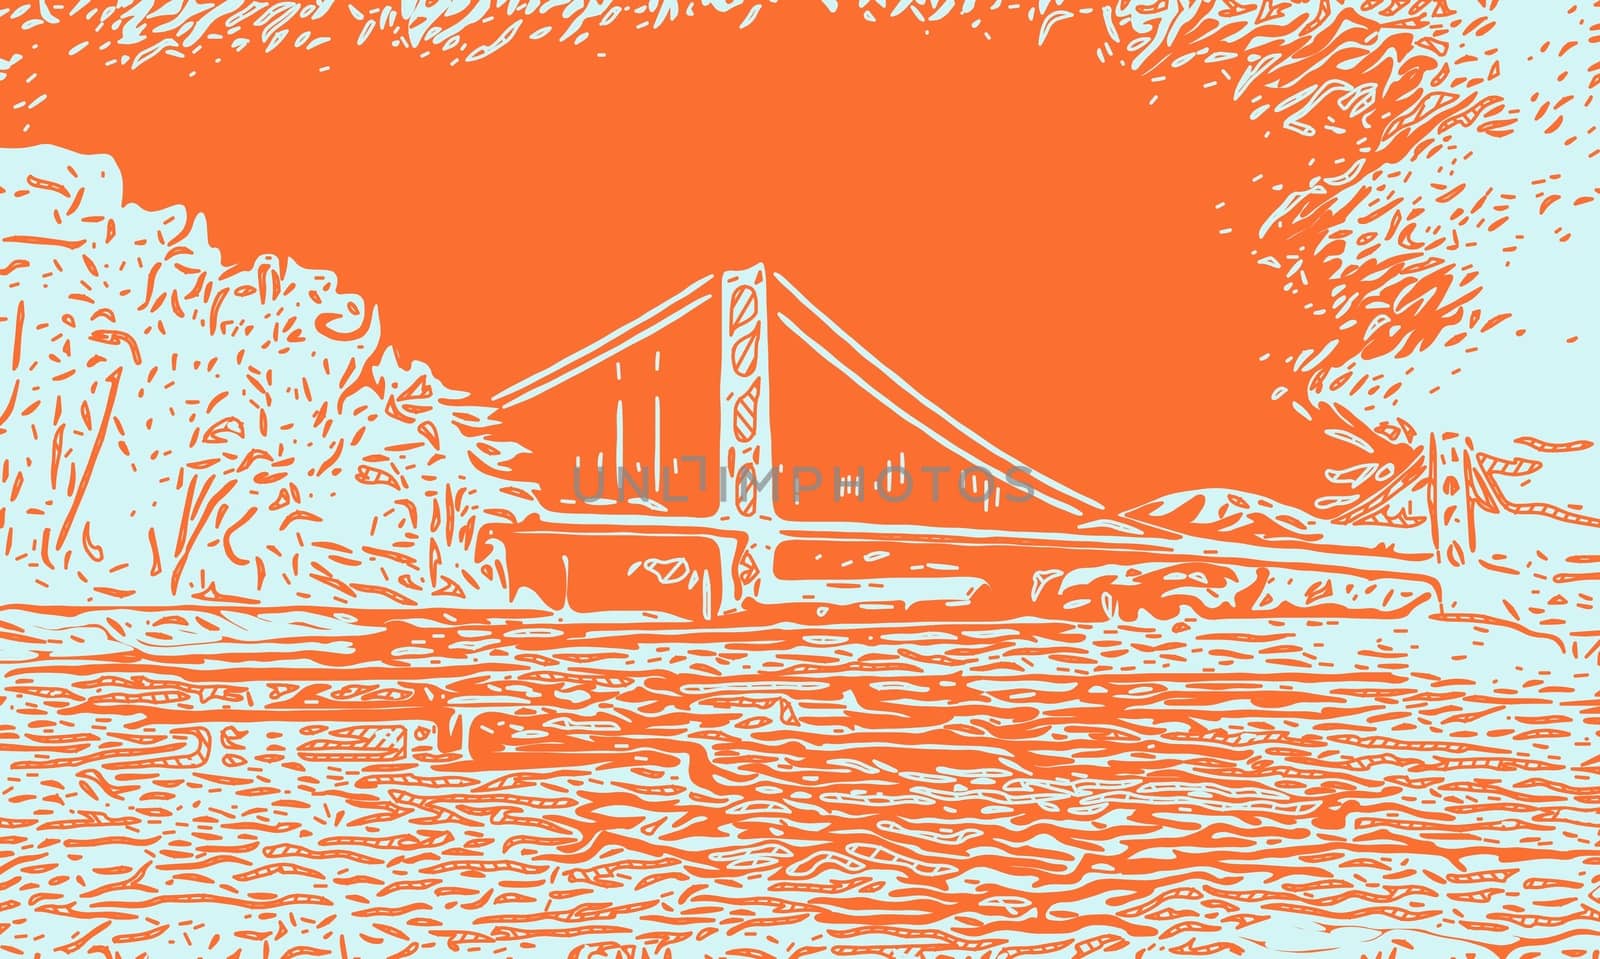 drawing golden gate bridge with orange background by Timmi